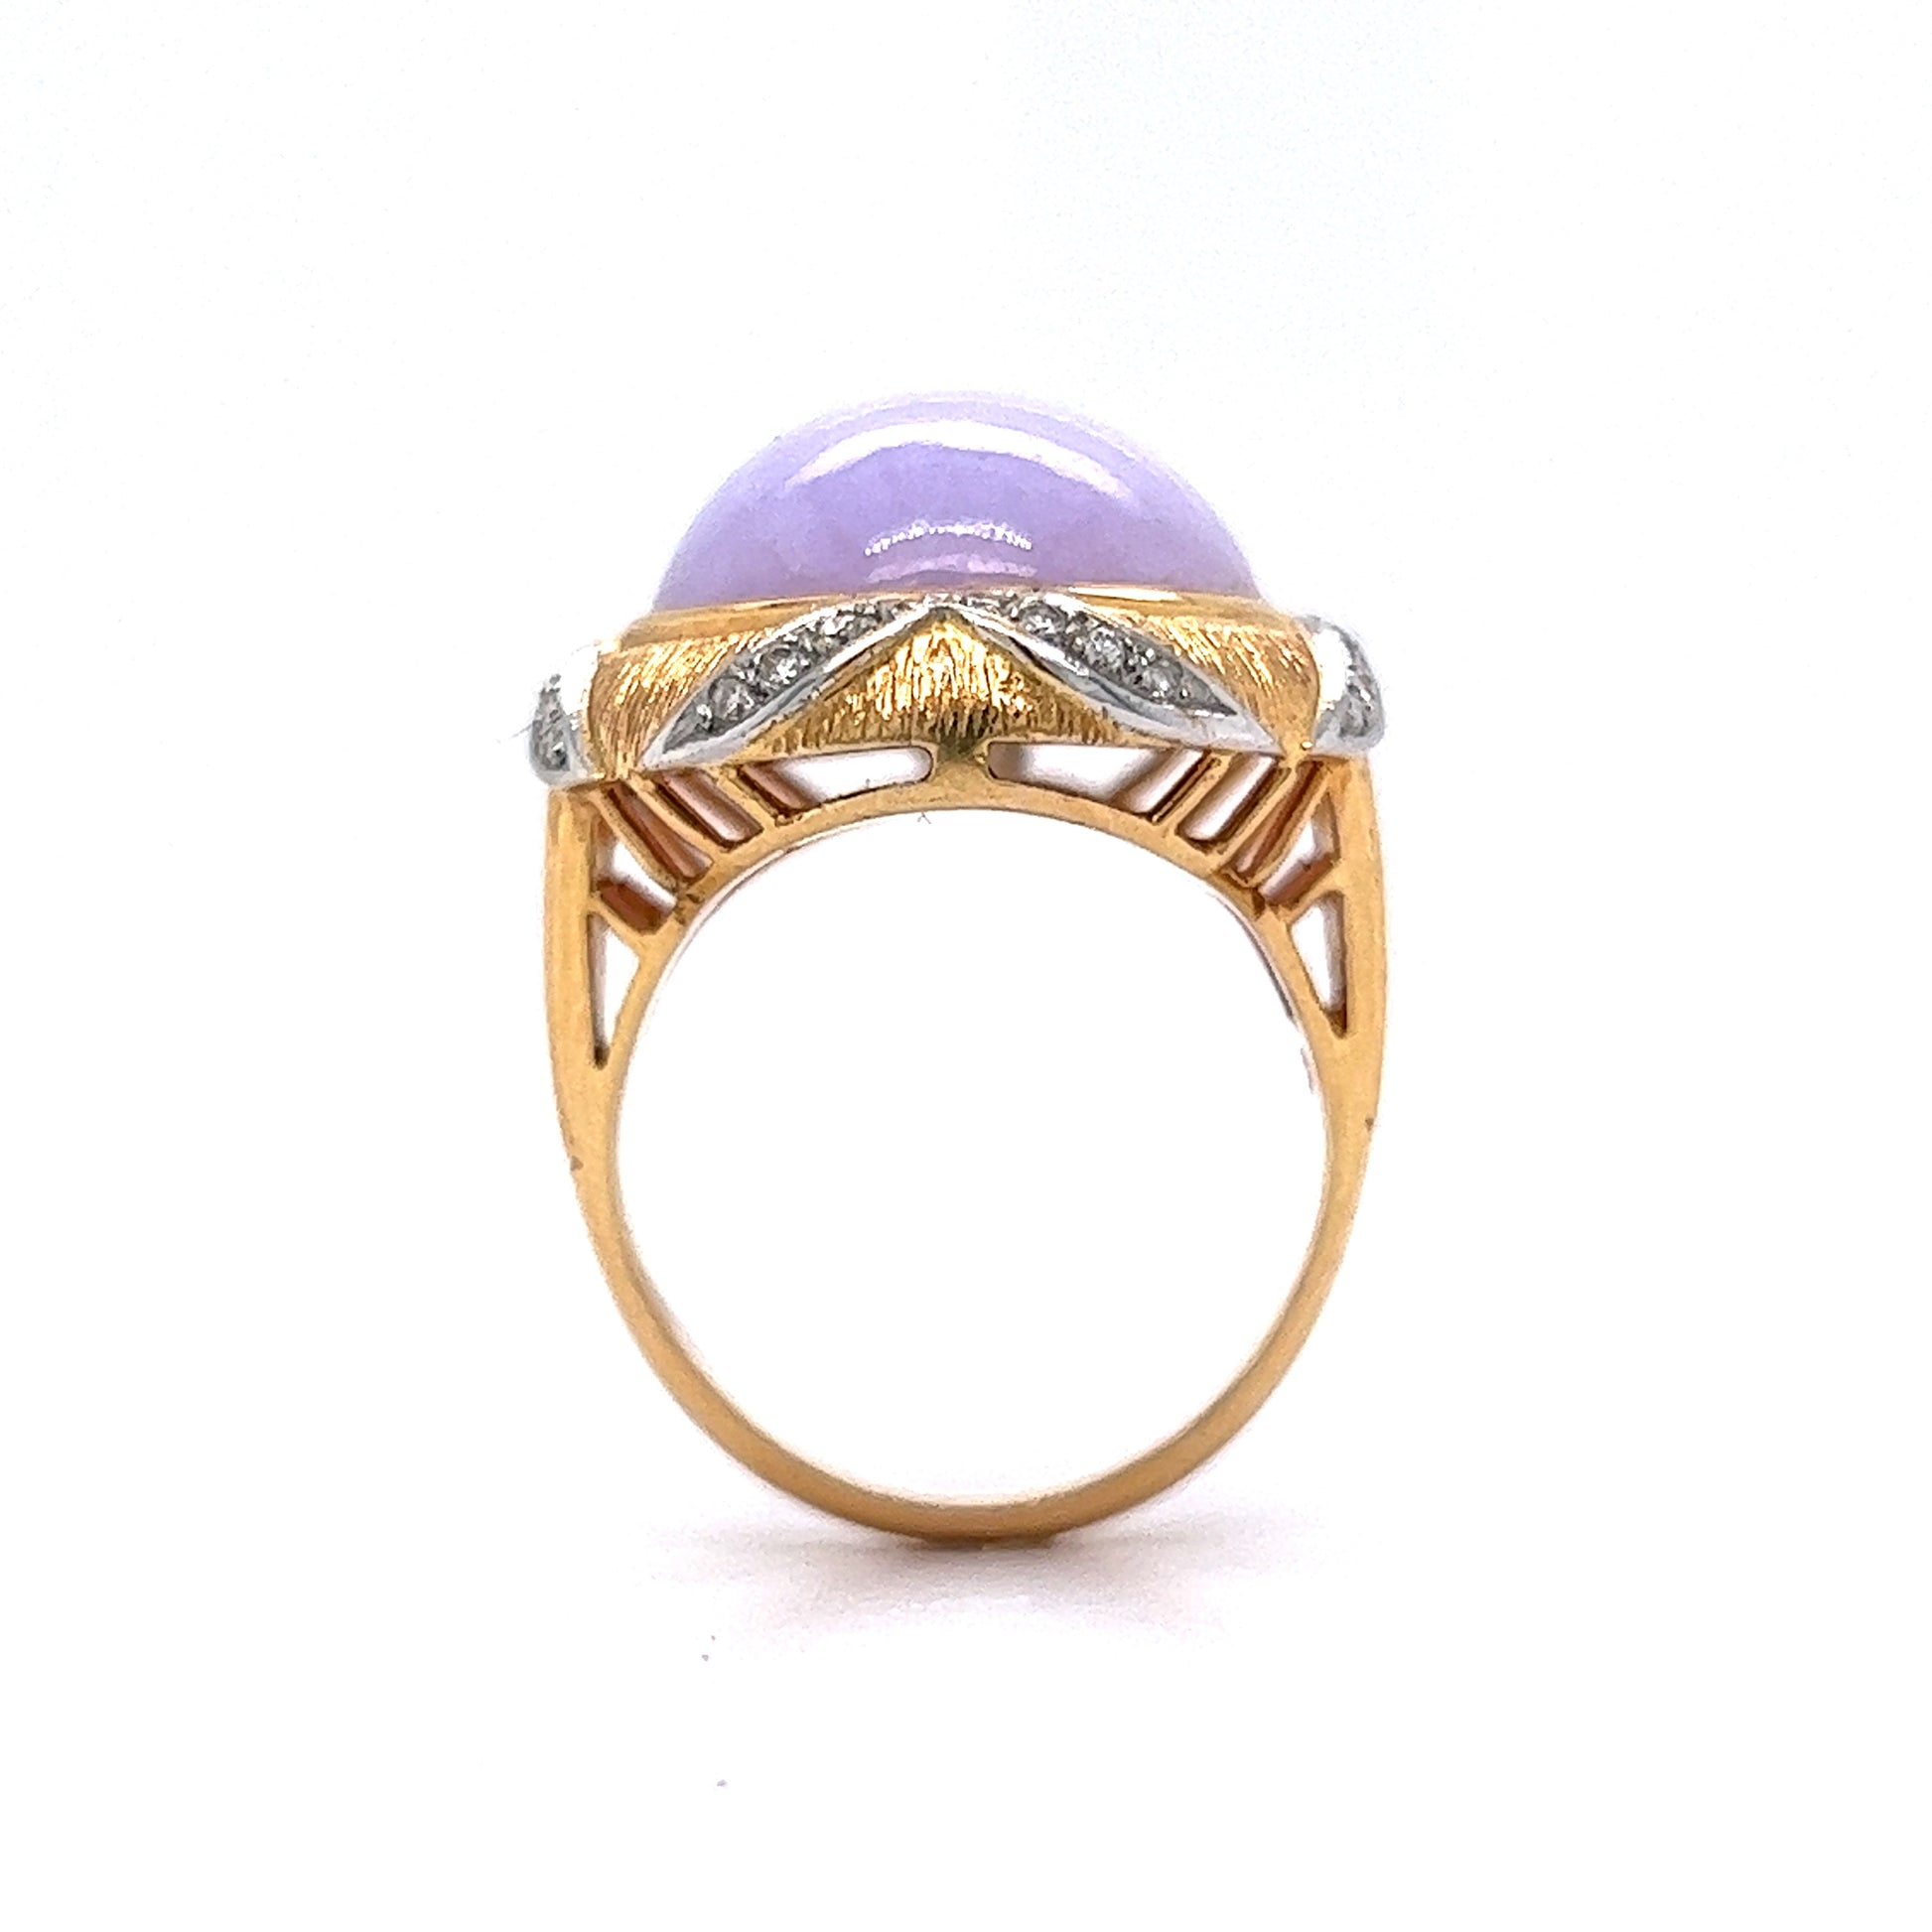 26.27 Lavender Jadeite Cabochon Cocktail Ring in 14k Yellow GoldComposition: 14 Karat Yellow GoldRing Size: 8.75Total Diamond Weight: .32 ctTotal Gram Weight: 16.7 gInscription: 14k